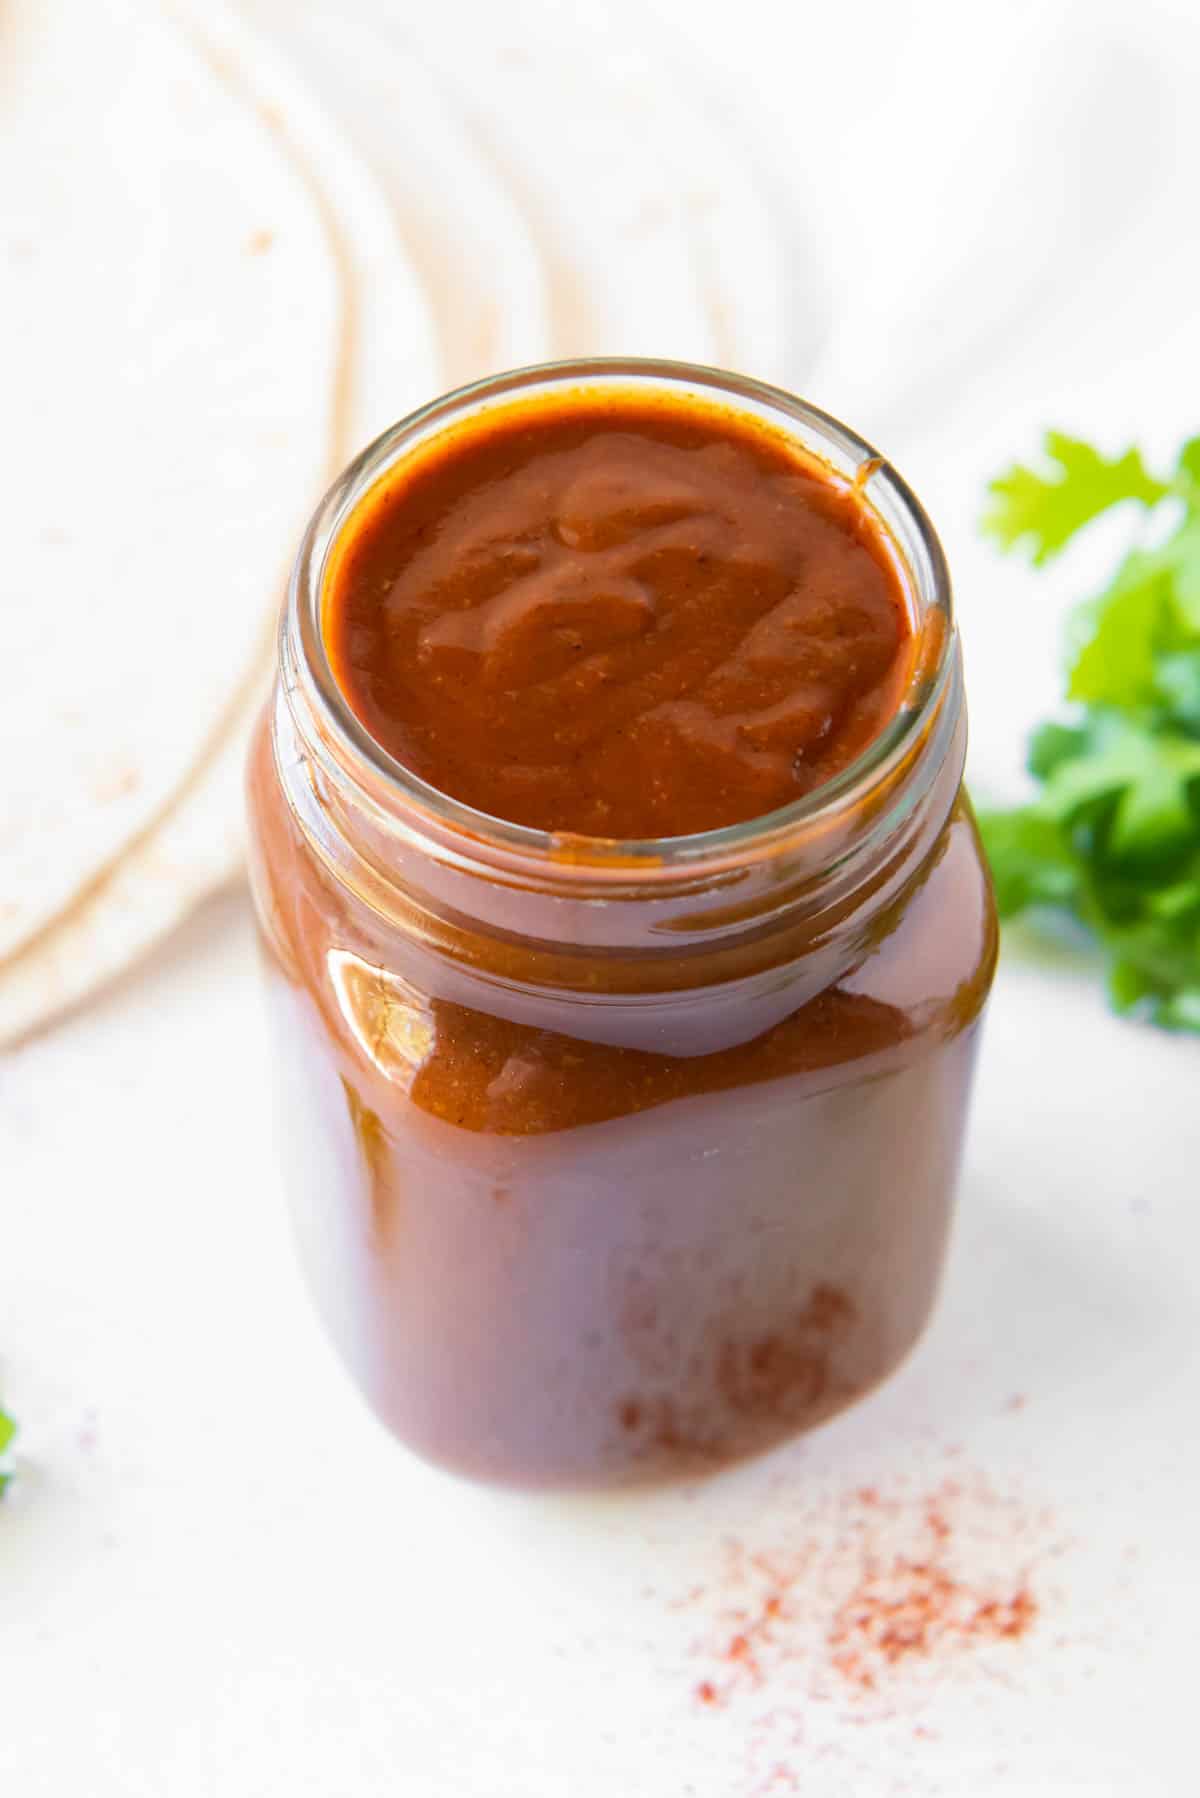 A glass jar filled with homemade enchilada sauce.